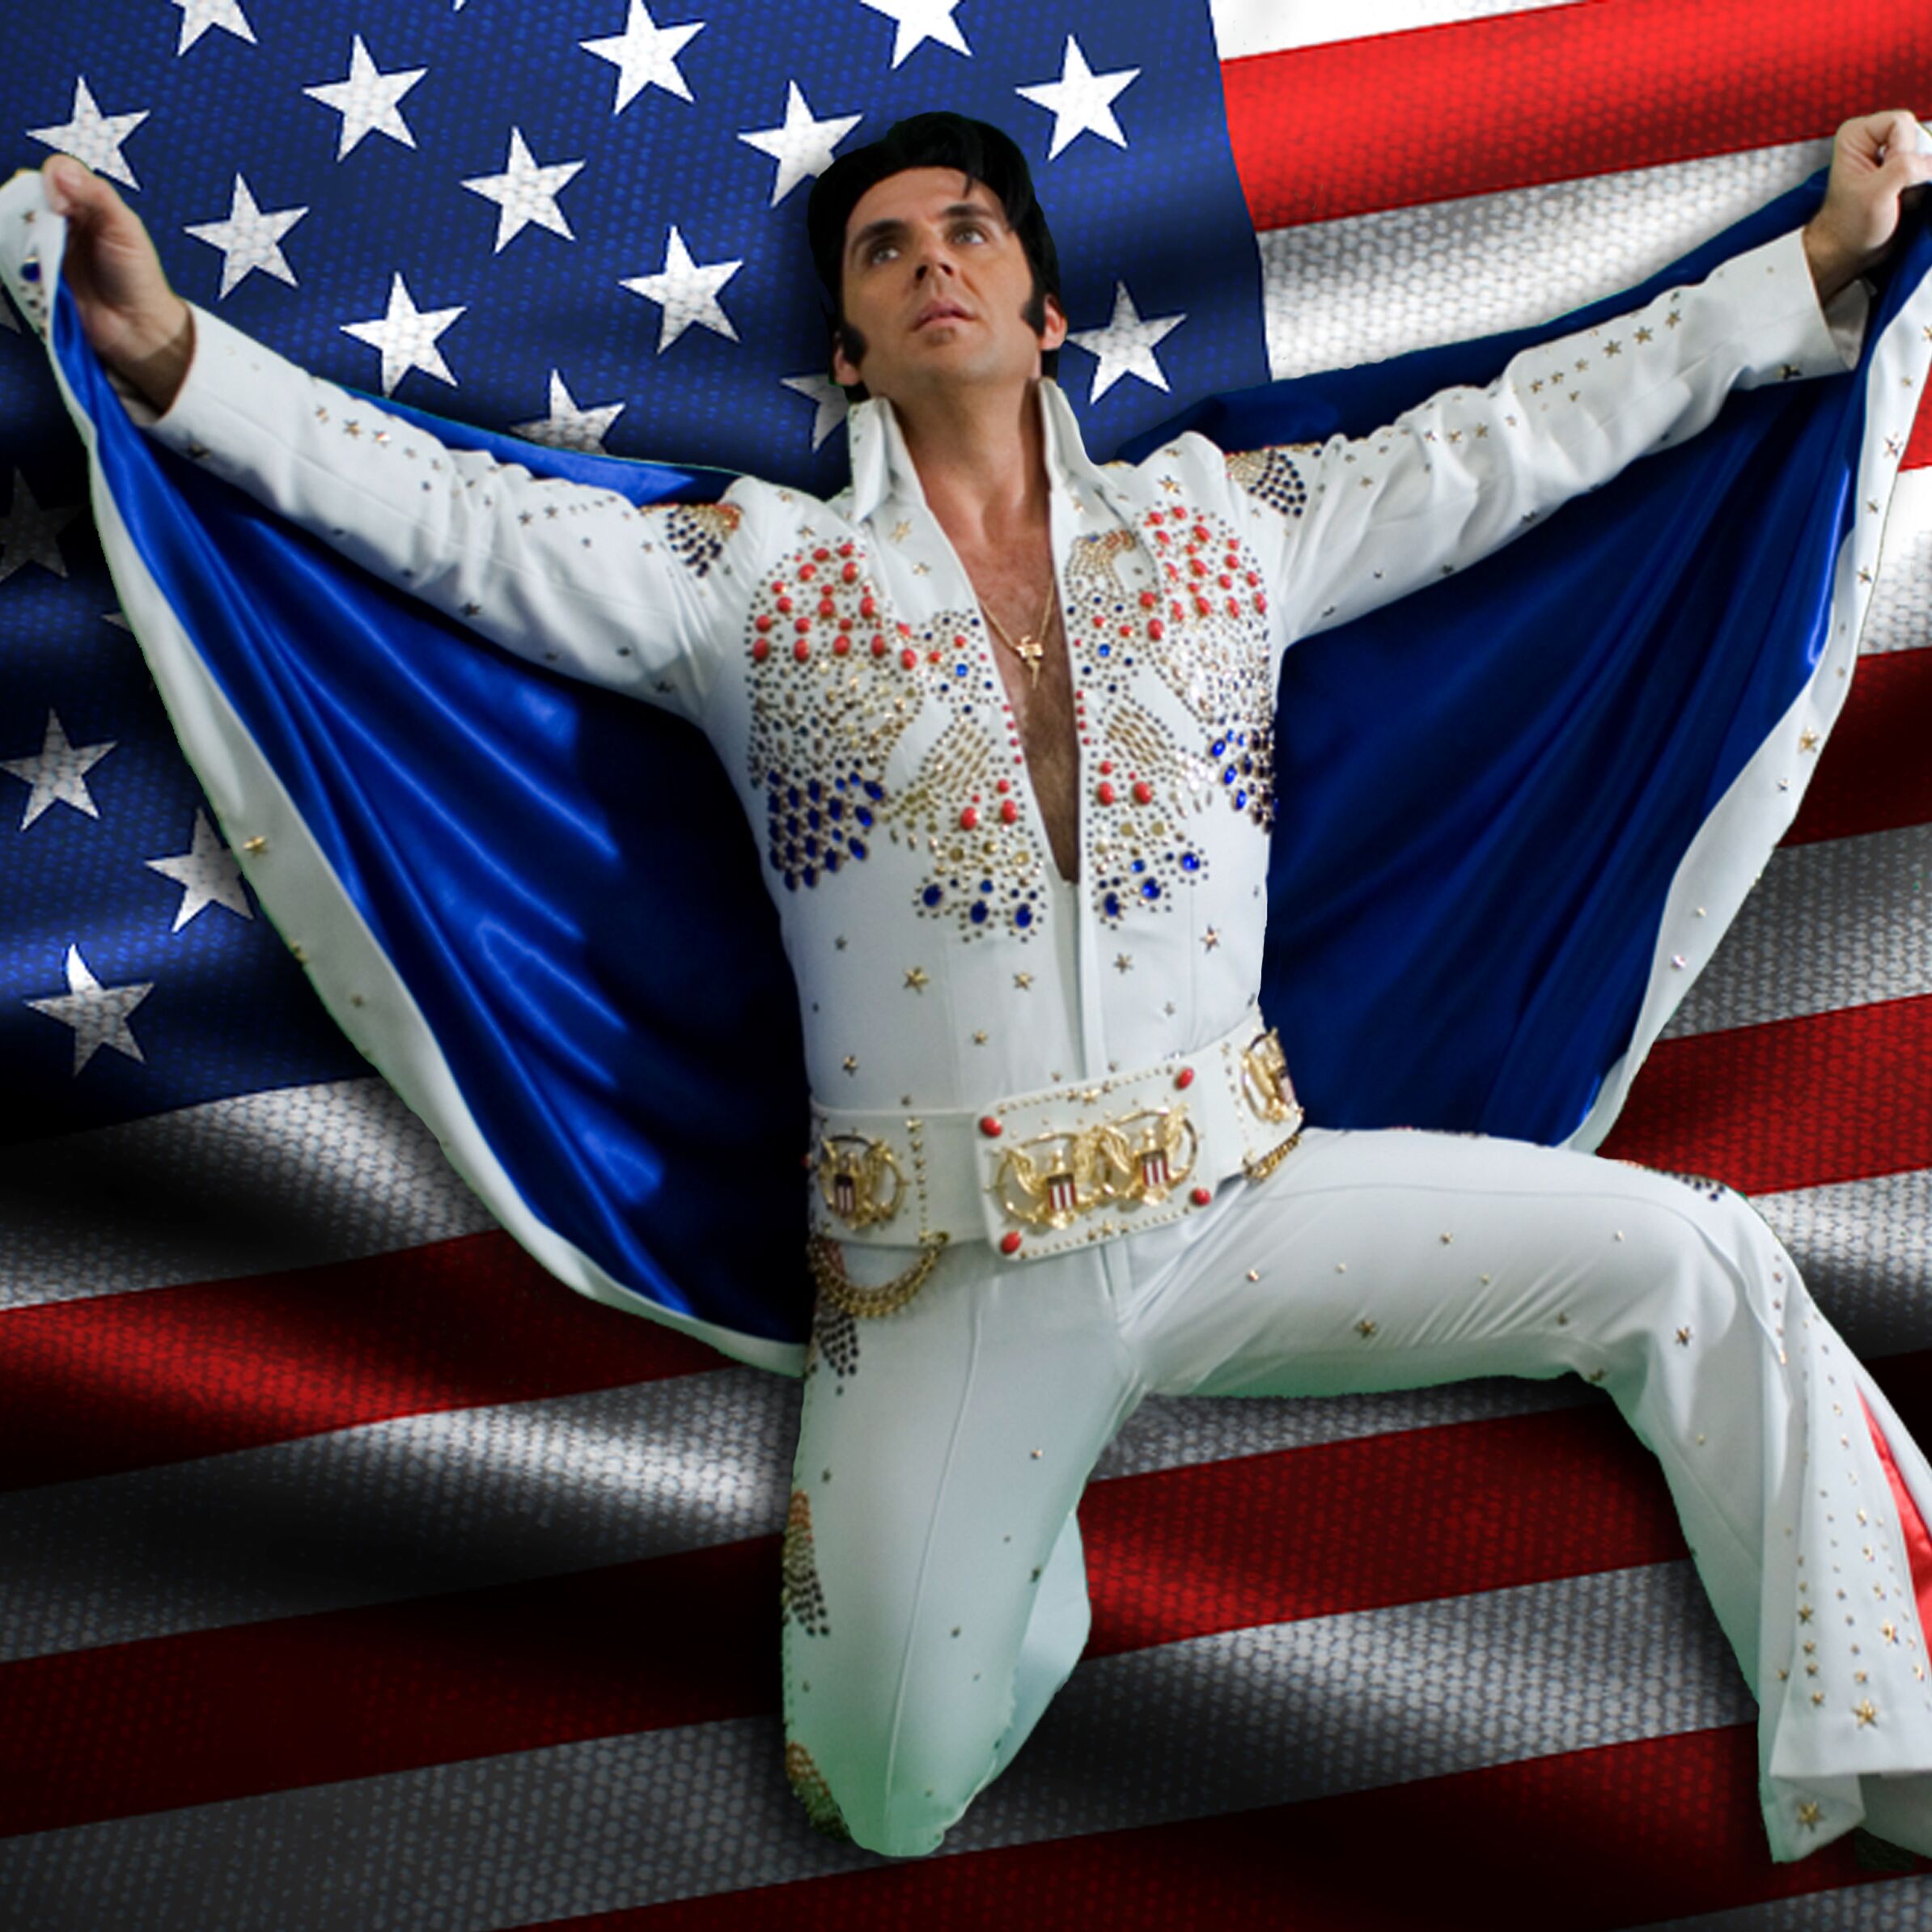 Hire Blue Suede Shoes Band - Elvis Impersonator in Yonkers, New York